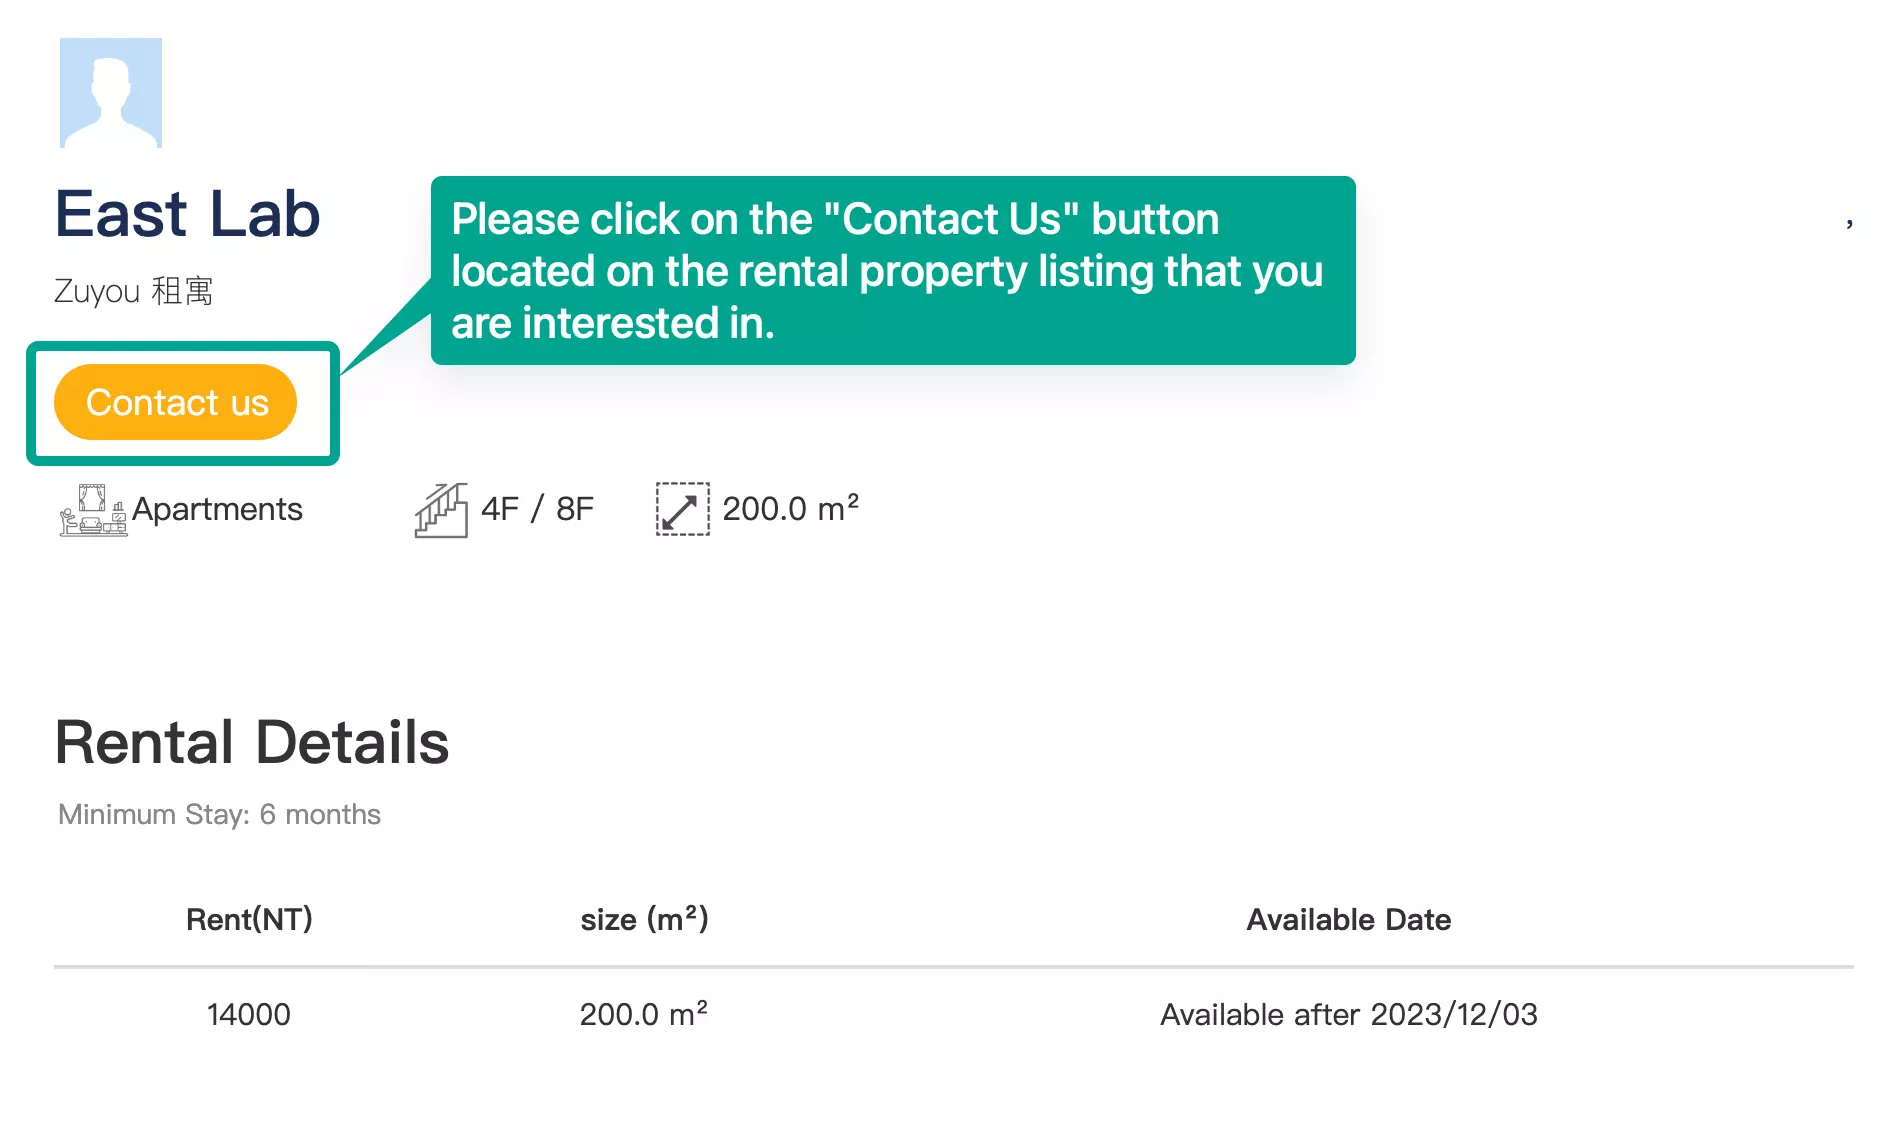 0-please-click-on-the-contact-us-button-on-the-listing-you-are-interested-in.png